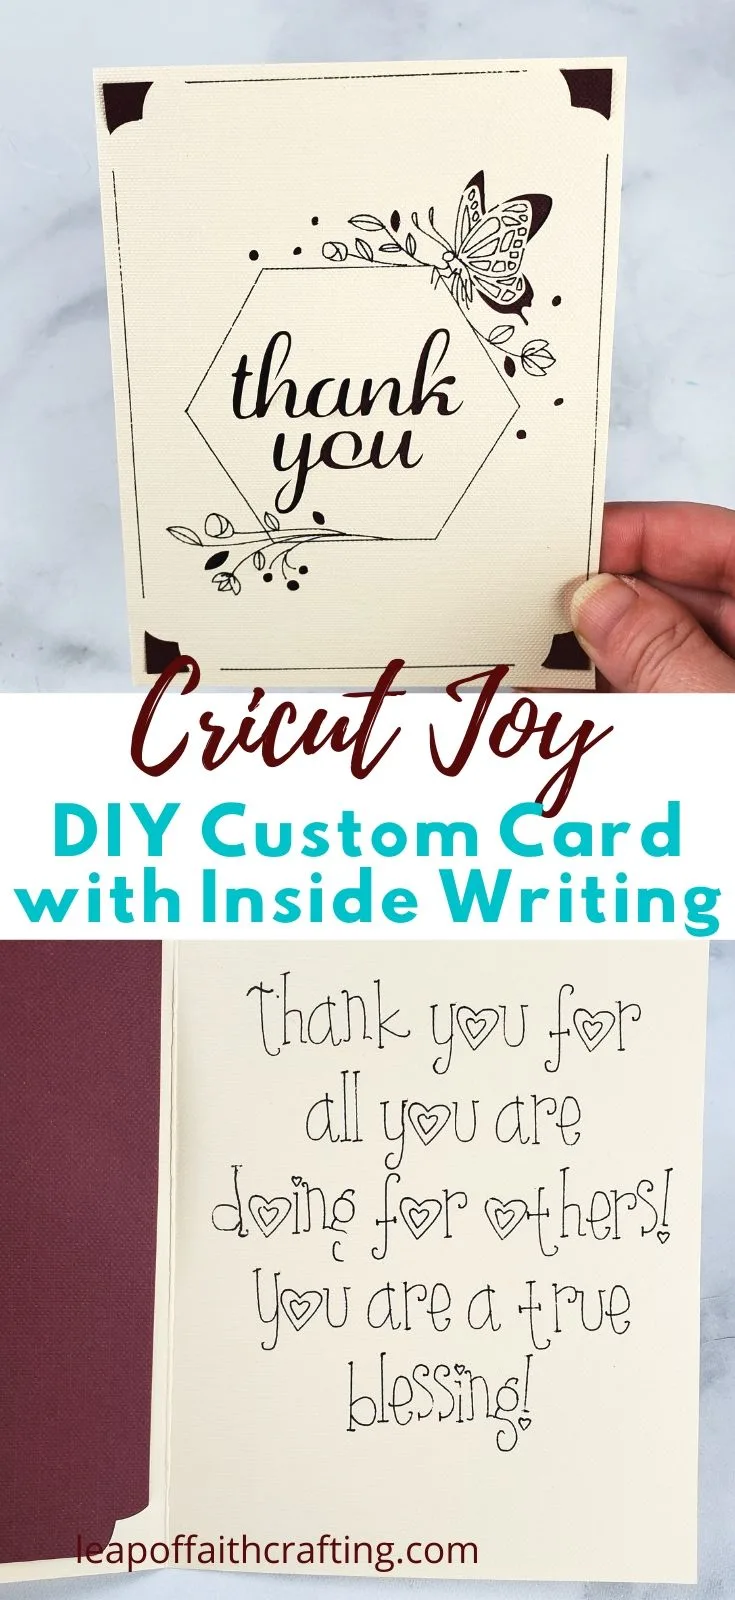 Writing and drawing with the Cricut Joy using sharpies and other